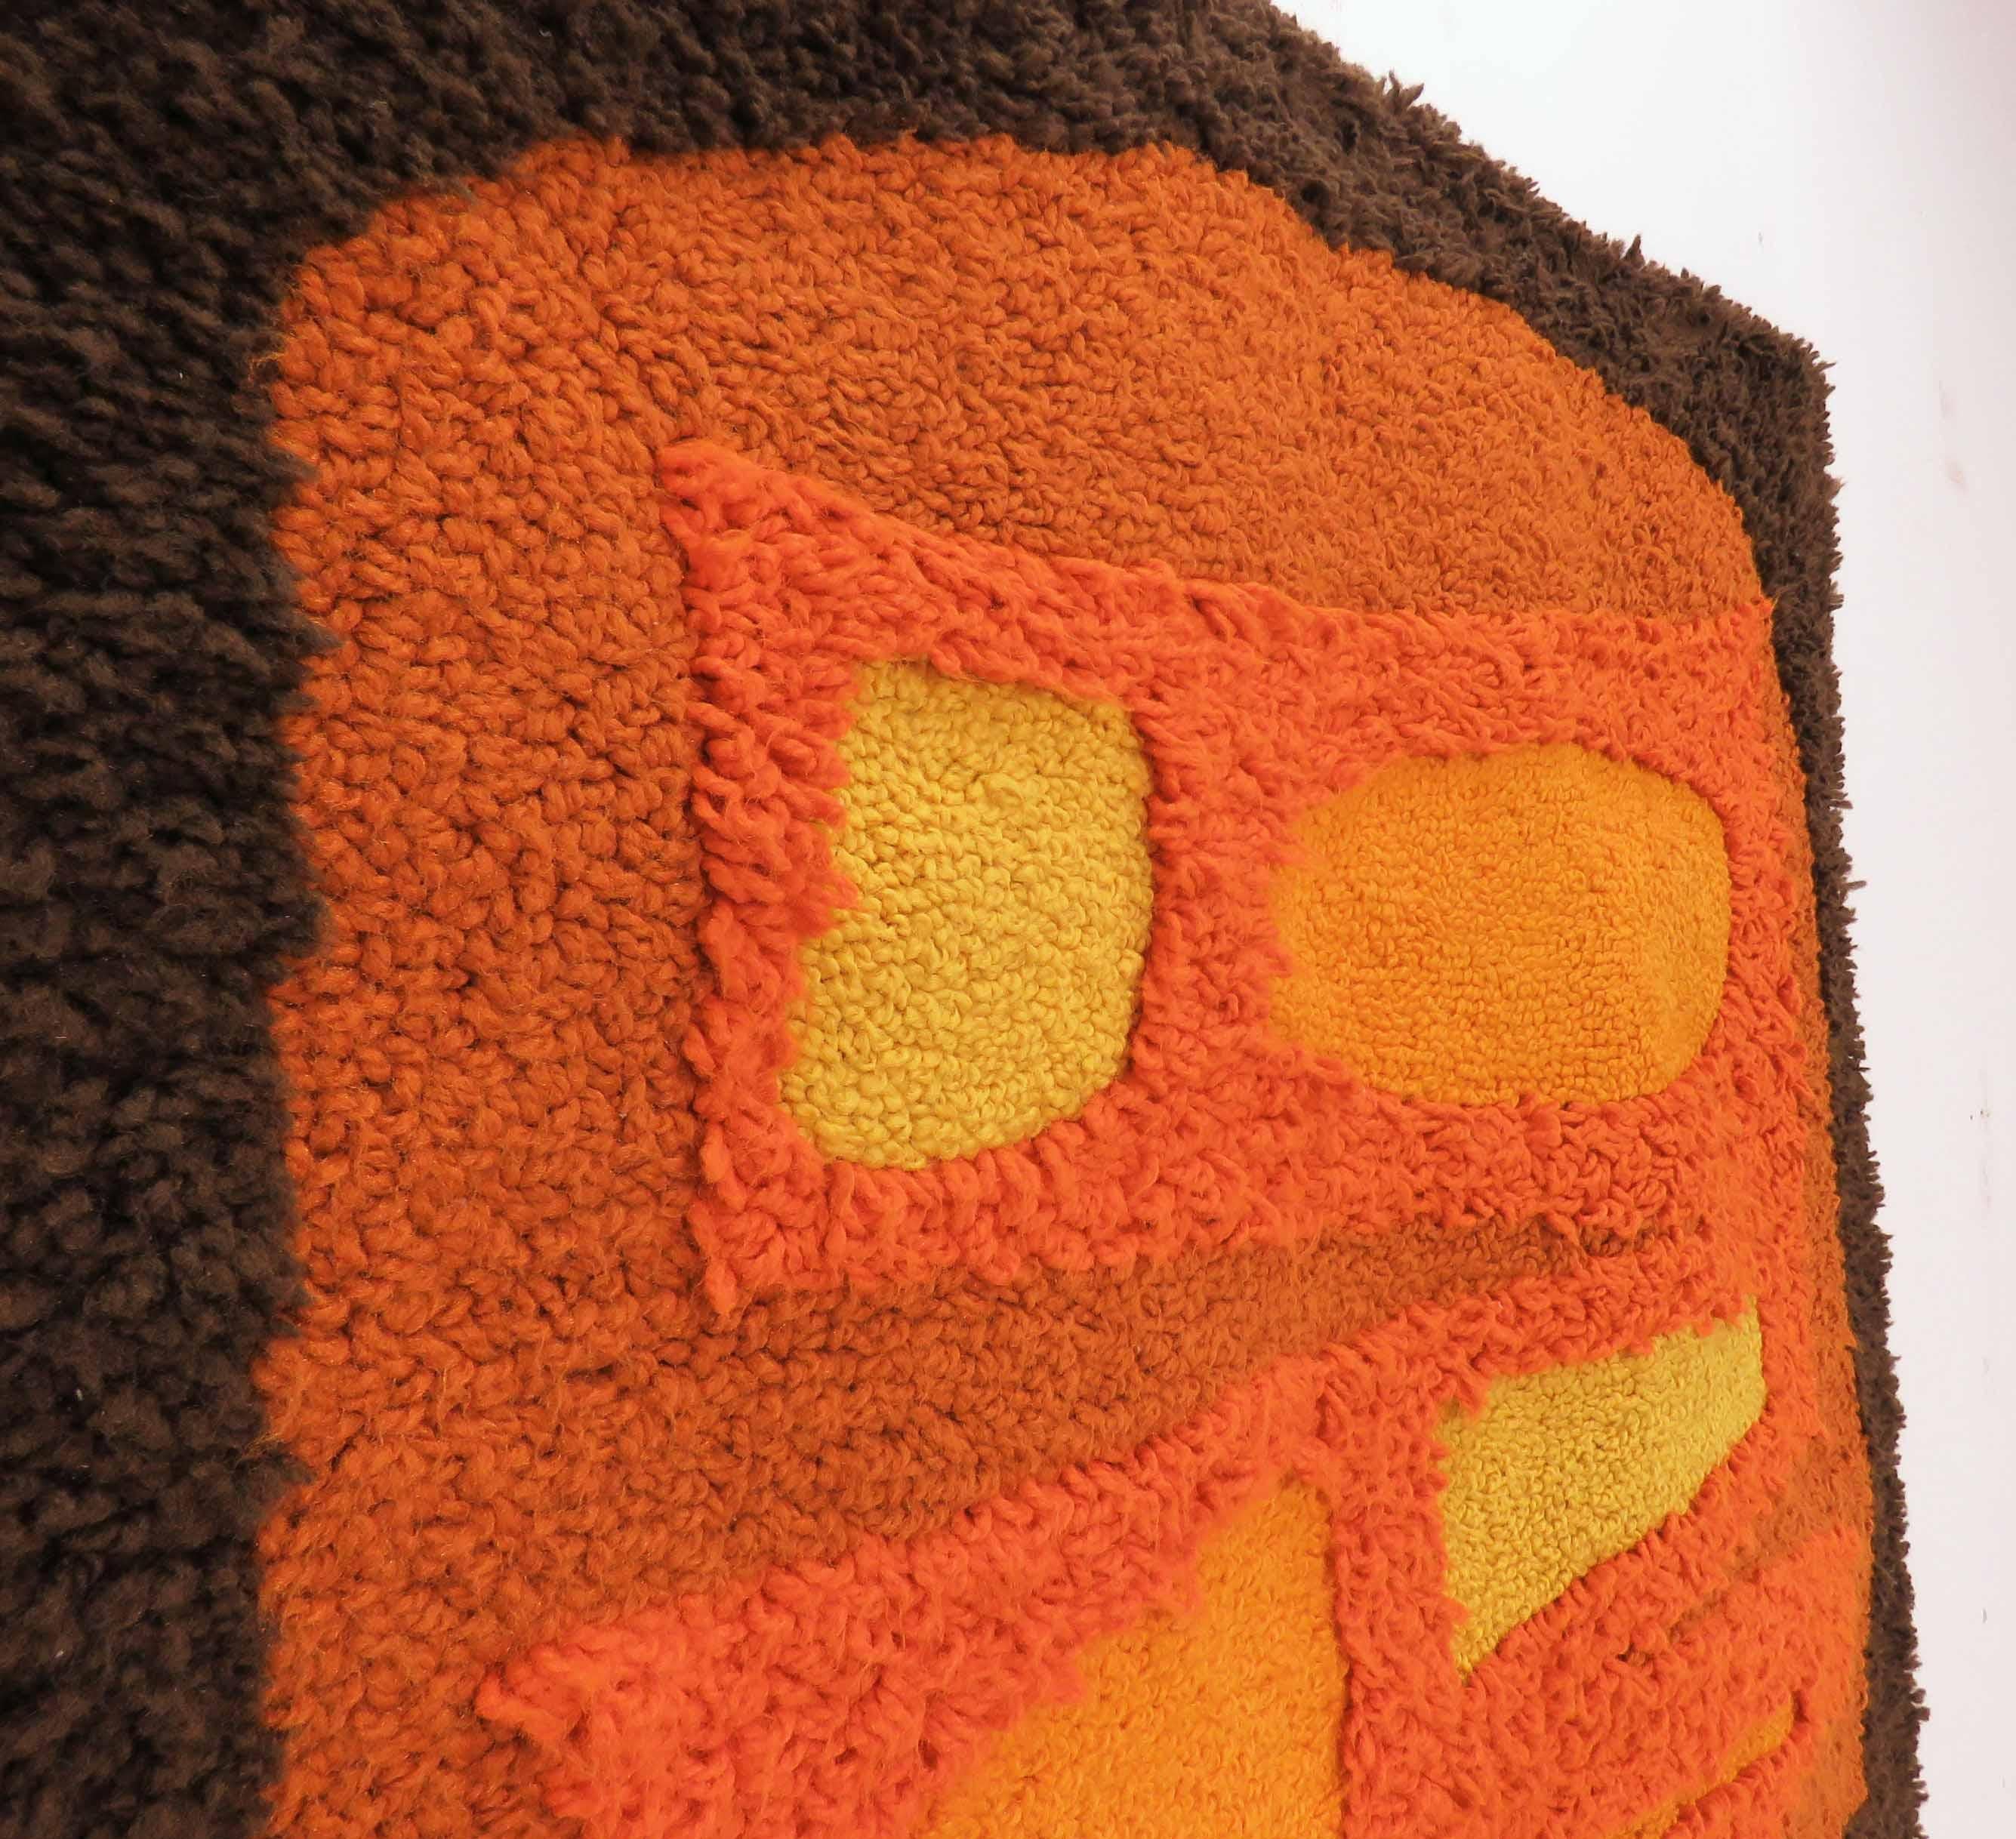 Late 20th Century Abstract Modernist Hand Hooked Fiber Art Wall Hanging, circa 1970s